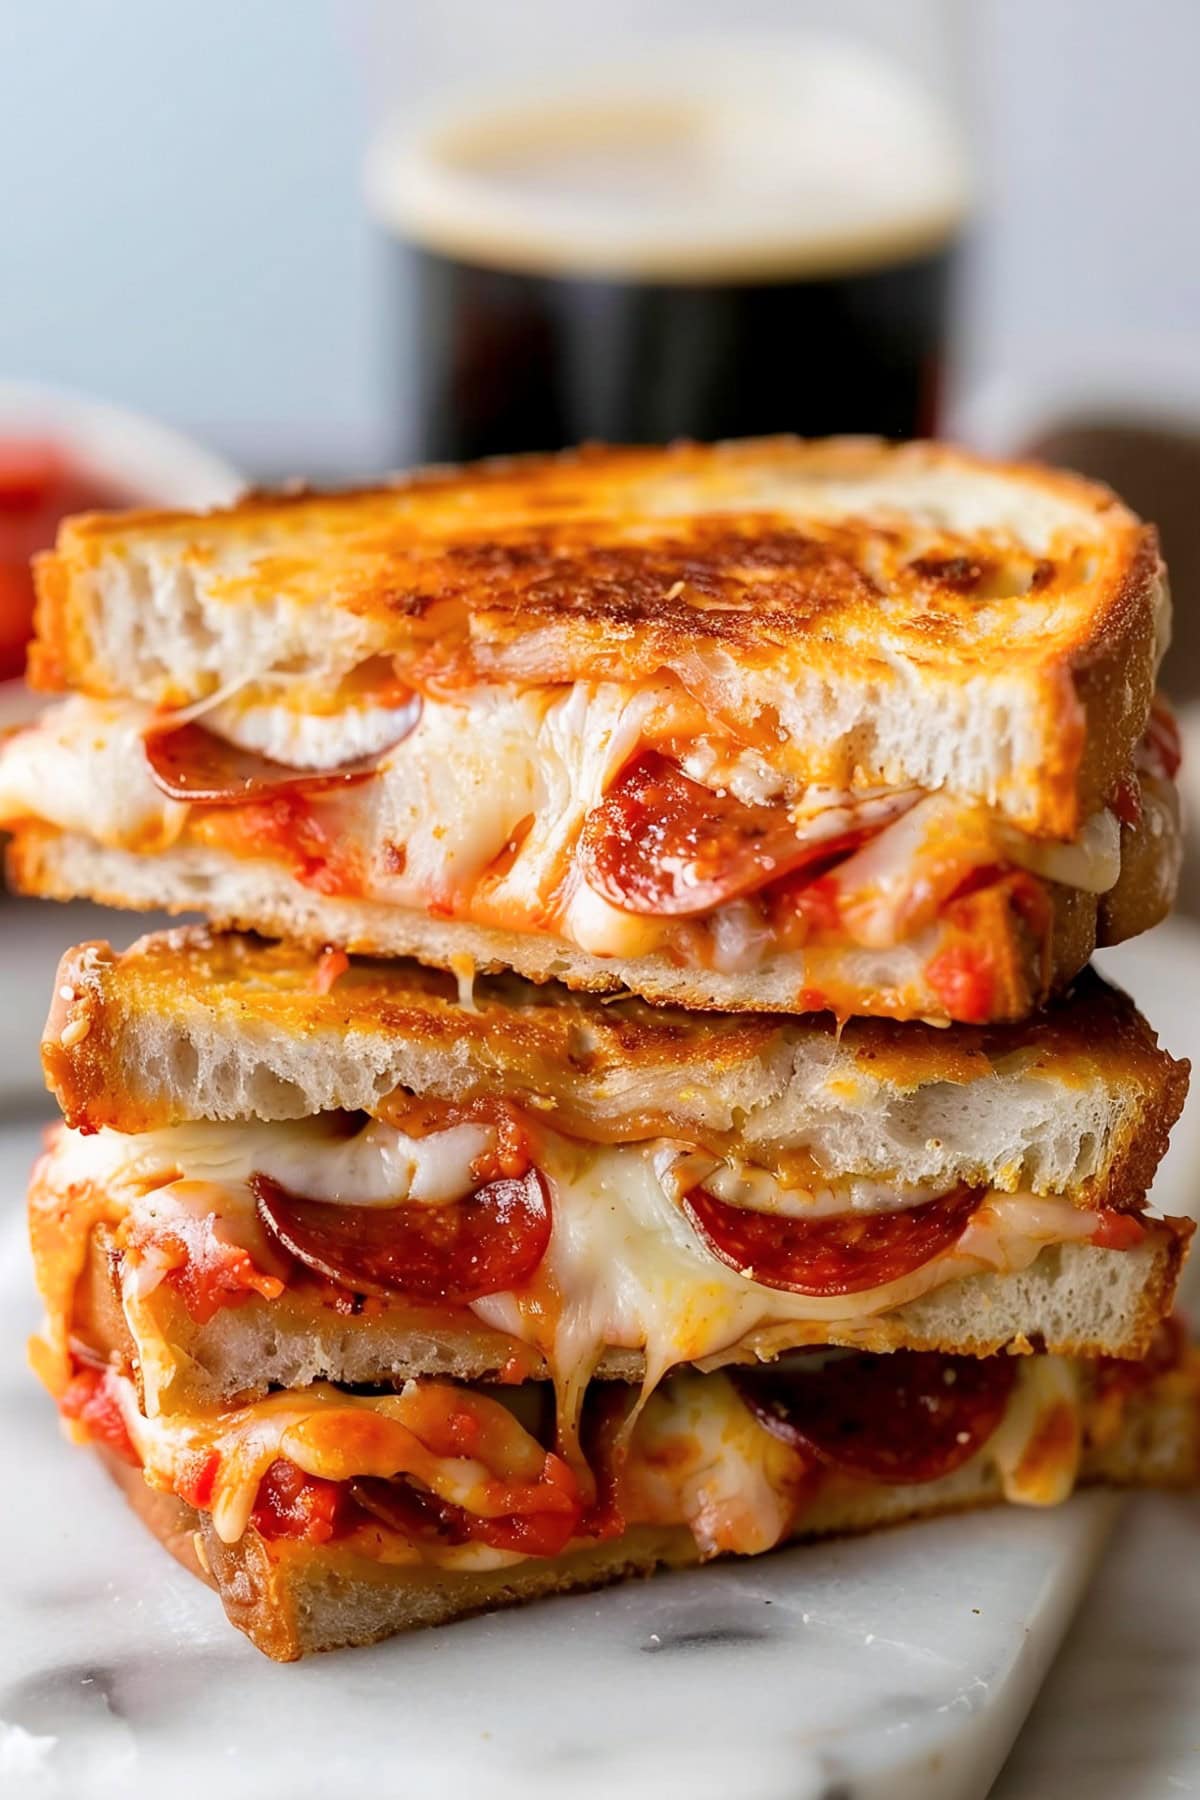 Homemade pizza grilled cheese, a fun twist on the classic sandwich that's easy to make and full of flavor